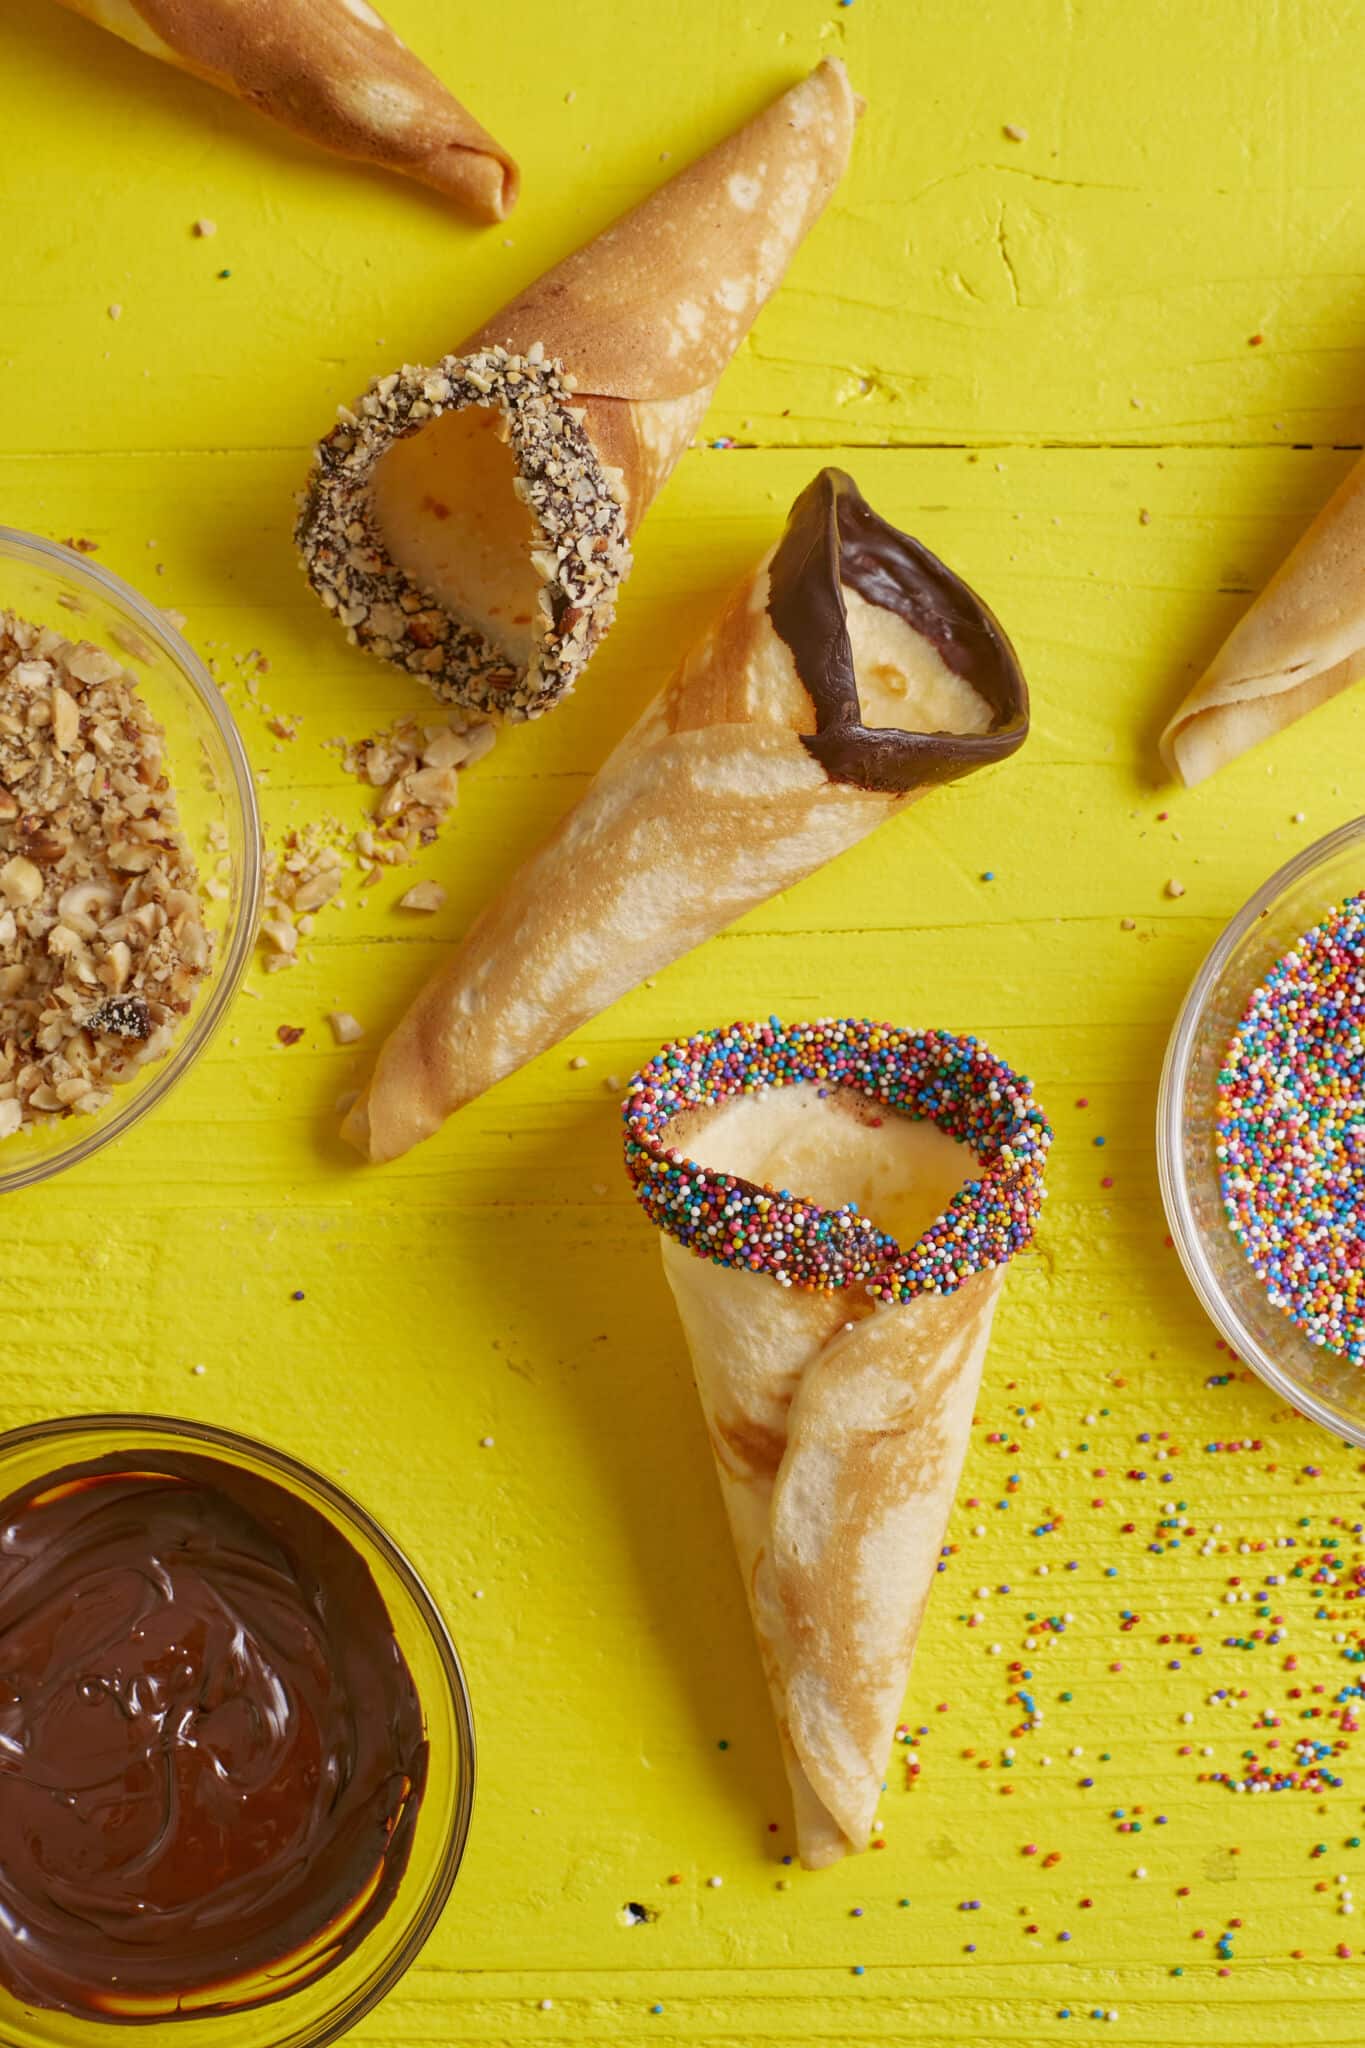 Decorate cones with melted chocolate, sprinkles, nuts, or other mix-ins of your choice.